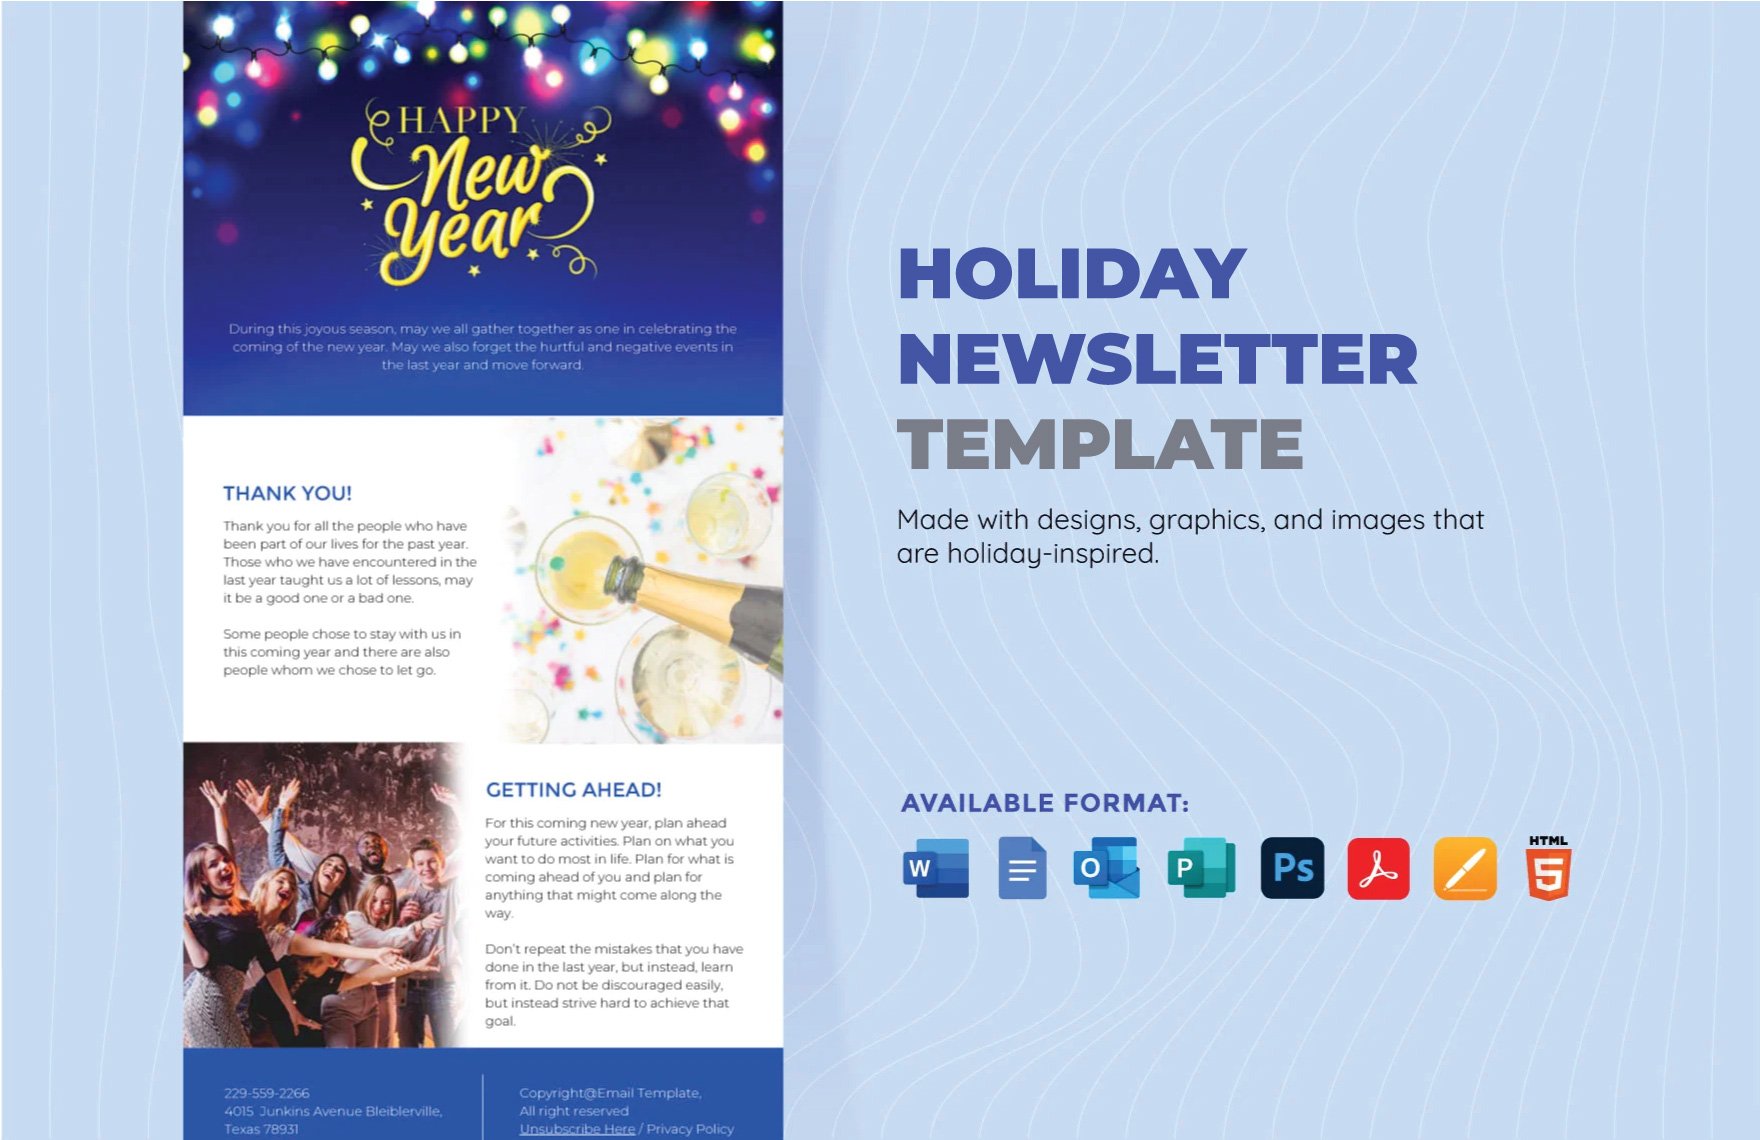 Holiday Newsletter Template in Word, PDF, PSD, Apple Pages, Publisher, Outlook, HTML5